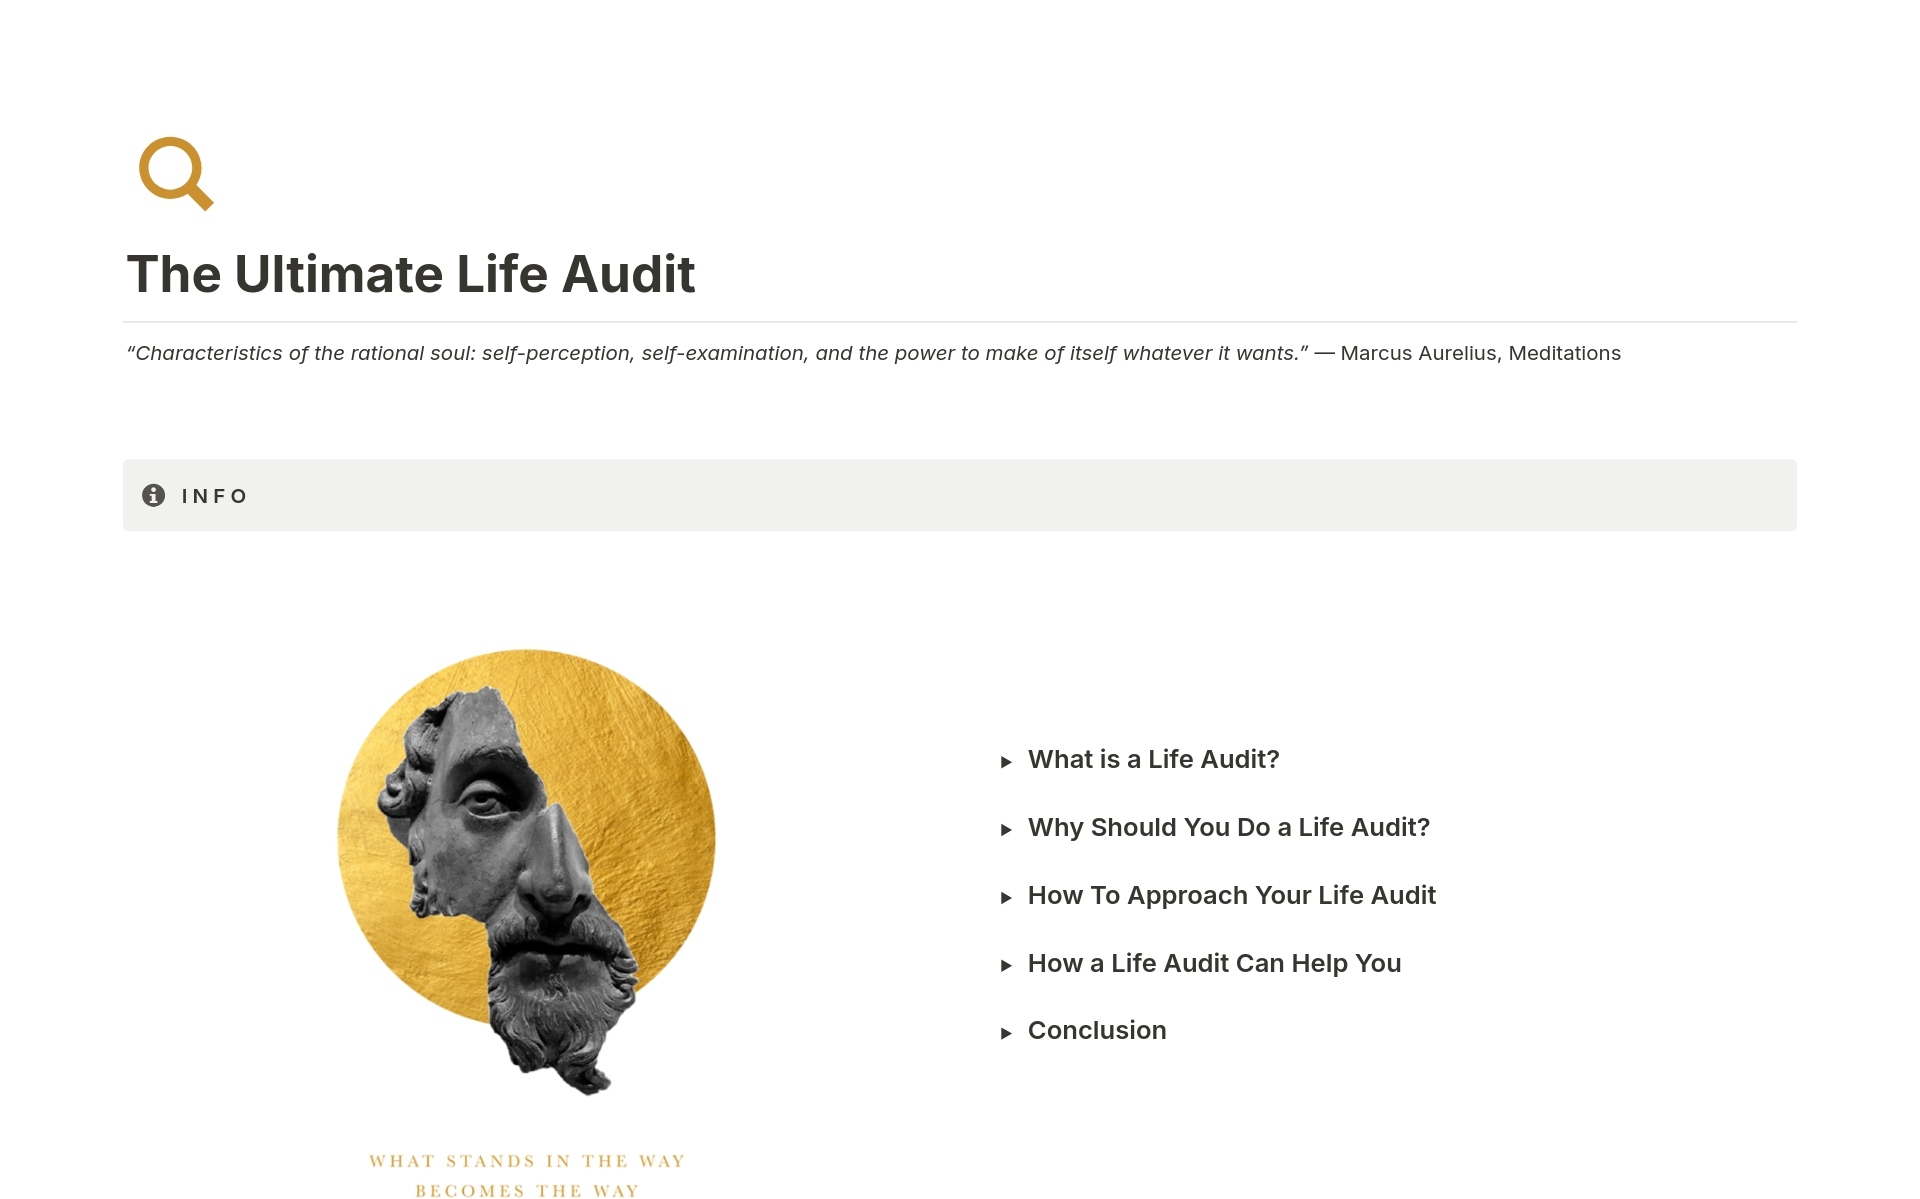 Discover your true self, gain clarity and understanding with The Ultimate Life Audit - FREE Notion Workbook
A complete, easy-to-use guide that helps you uncover deep insights and brings you closer to self-discovery and fulfillment.